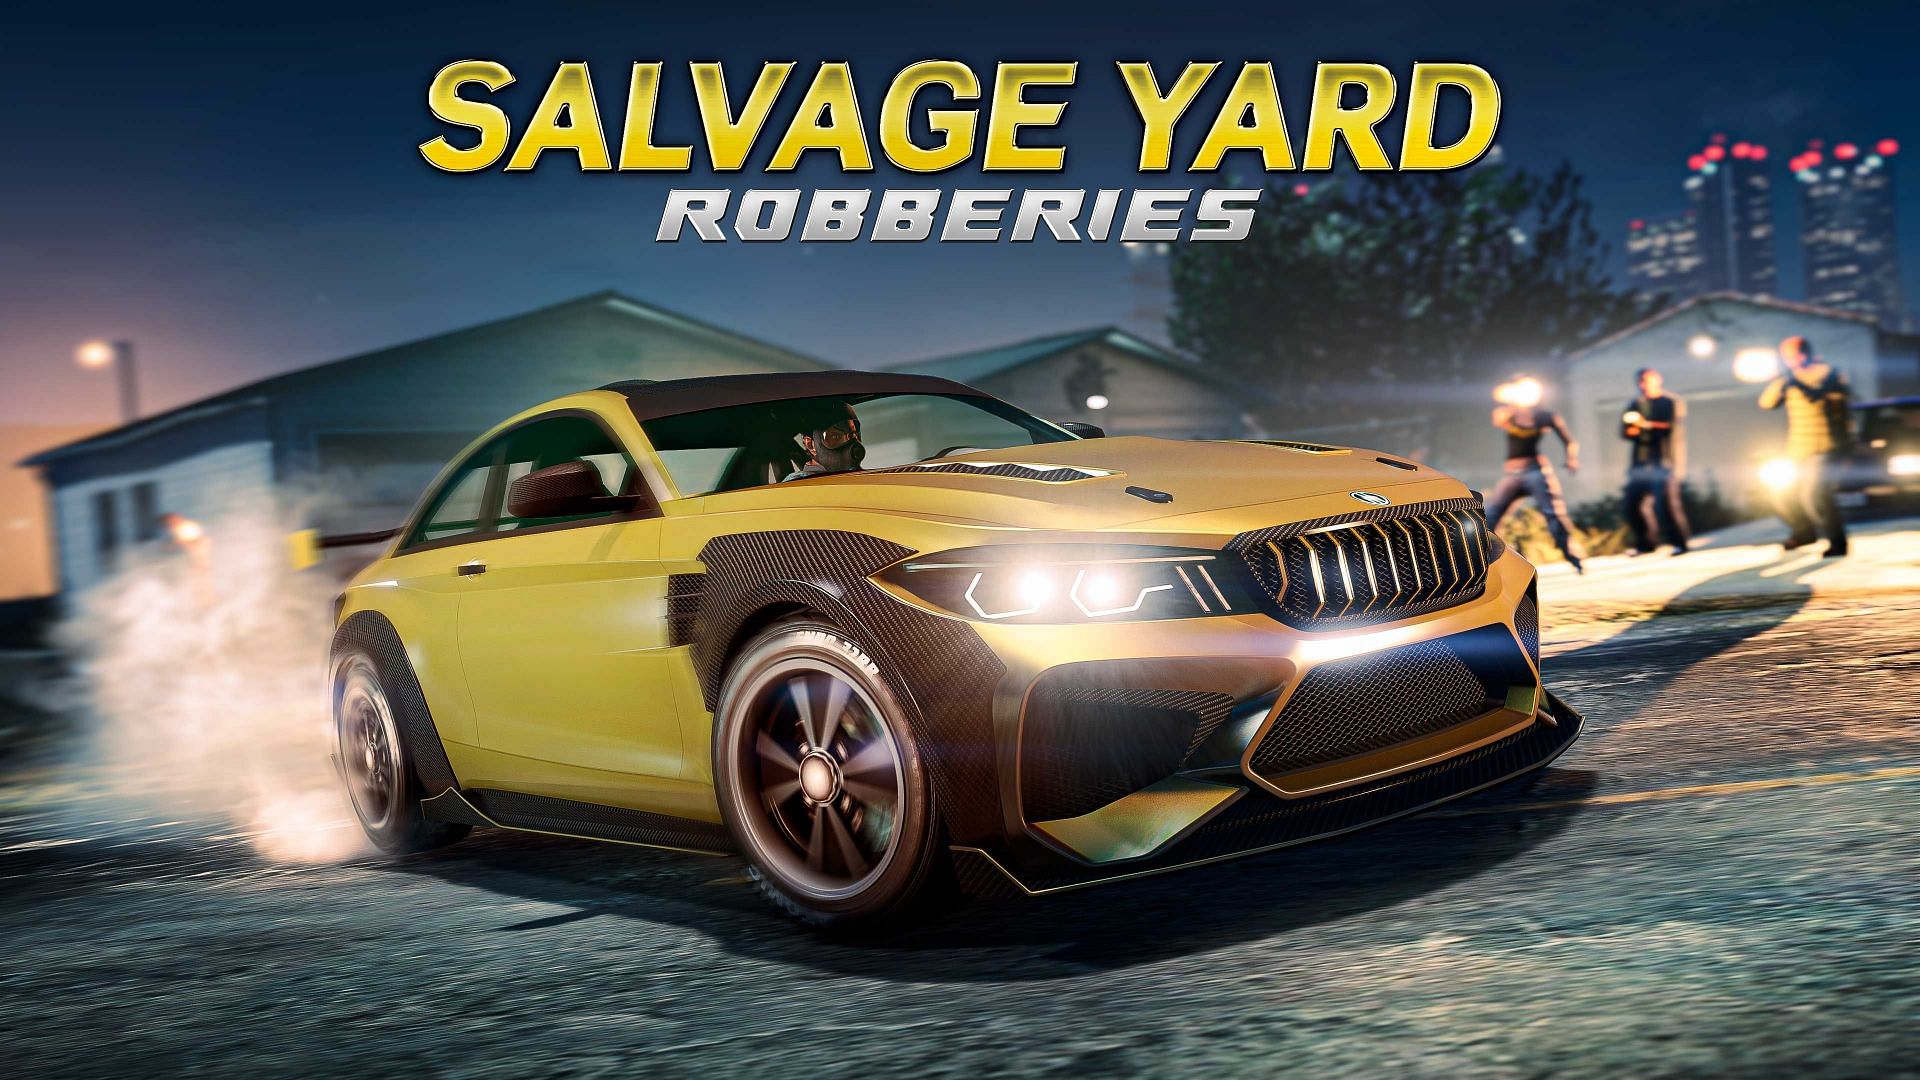 Salvage Yard Robberies are a fun way to make money in GTA Online (Image via Rockstar Games)